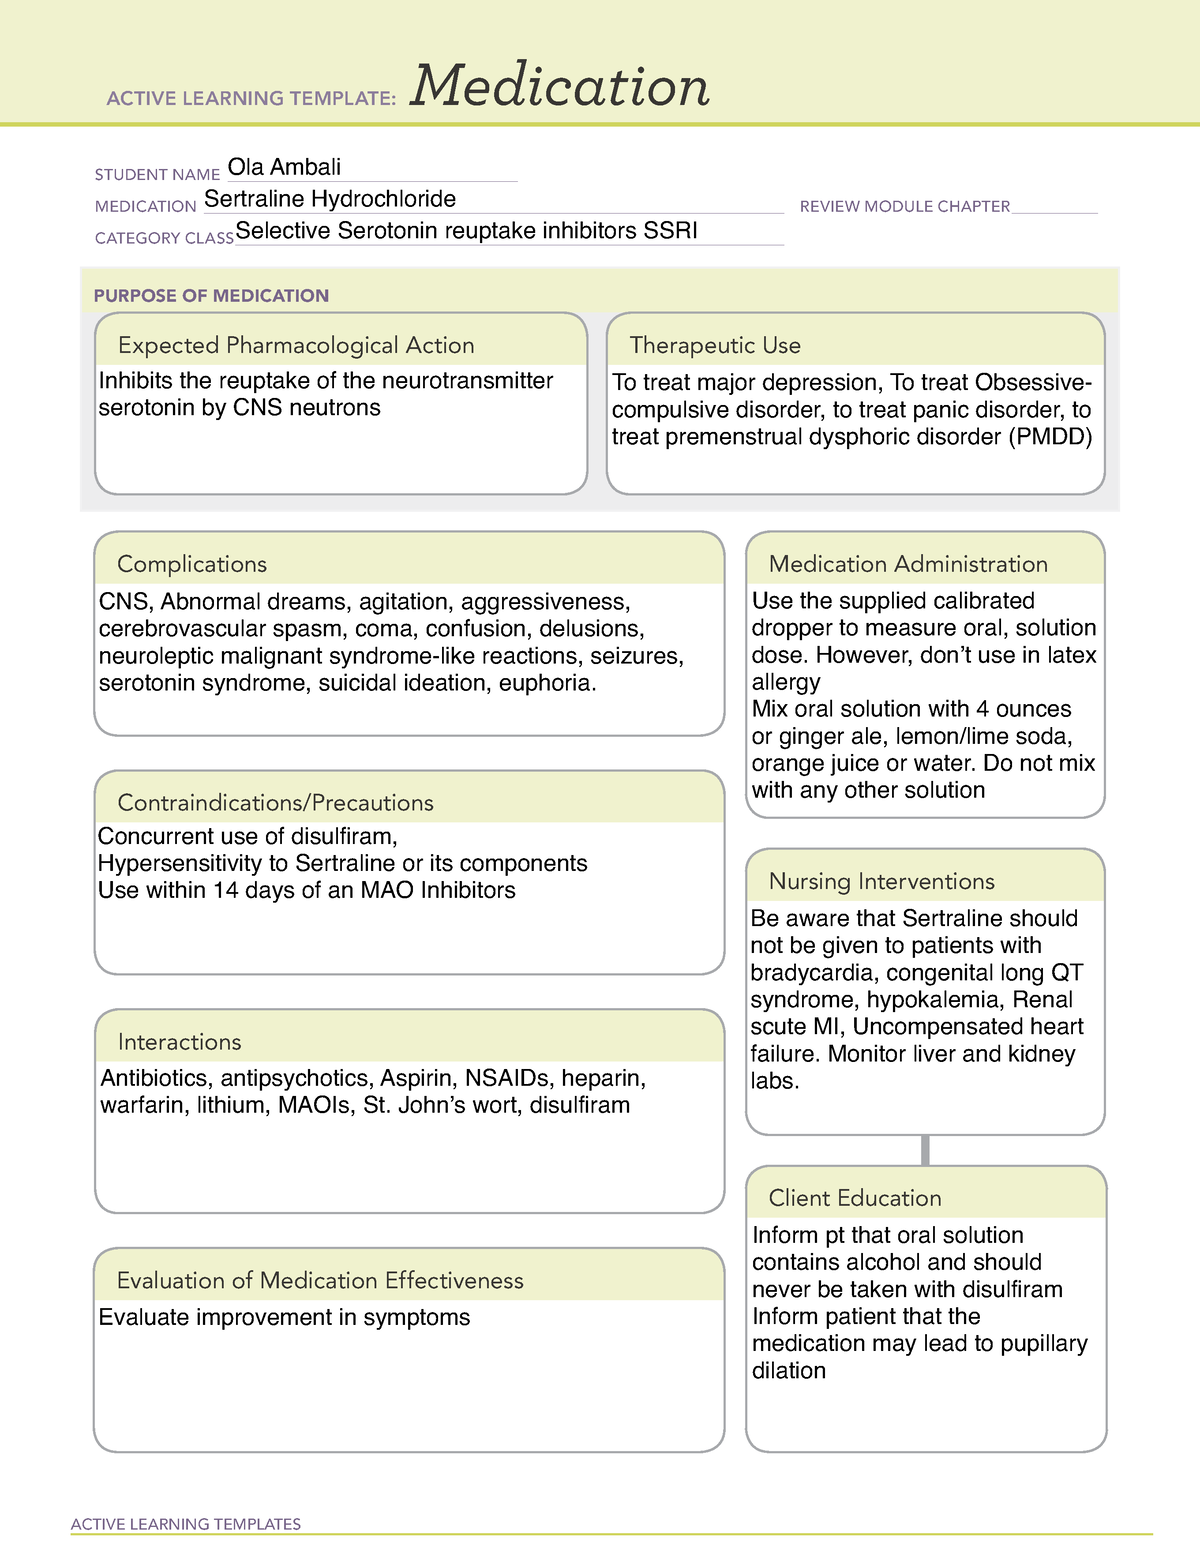 Sertraline hydrochloride MED TEMPLATE ACTIVE LEARNING TEMPLATES